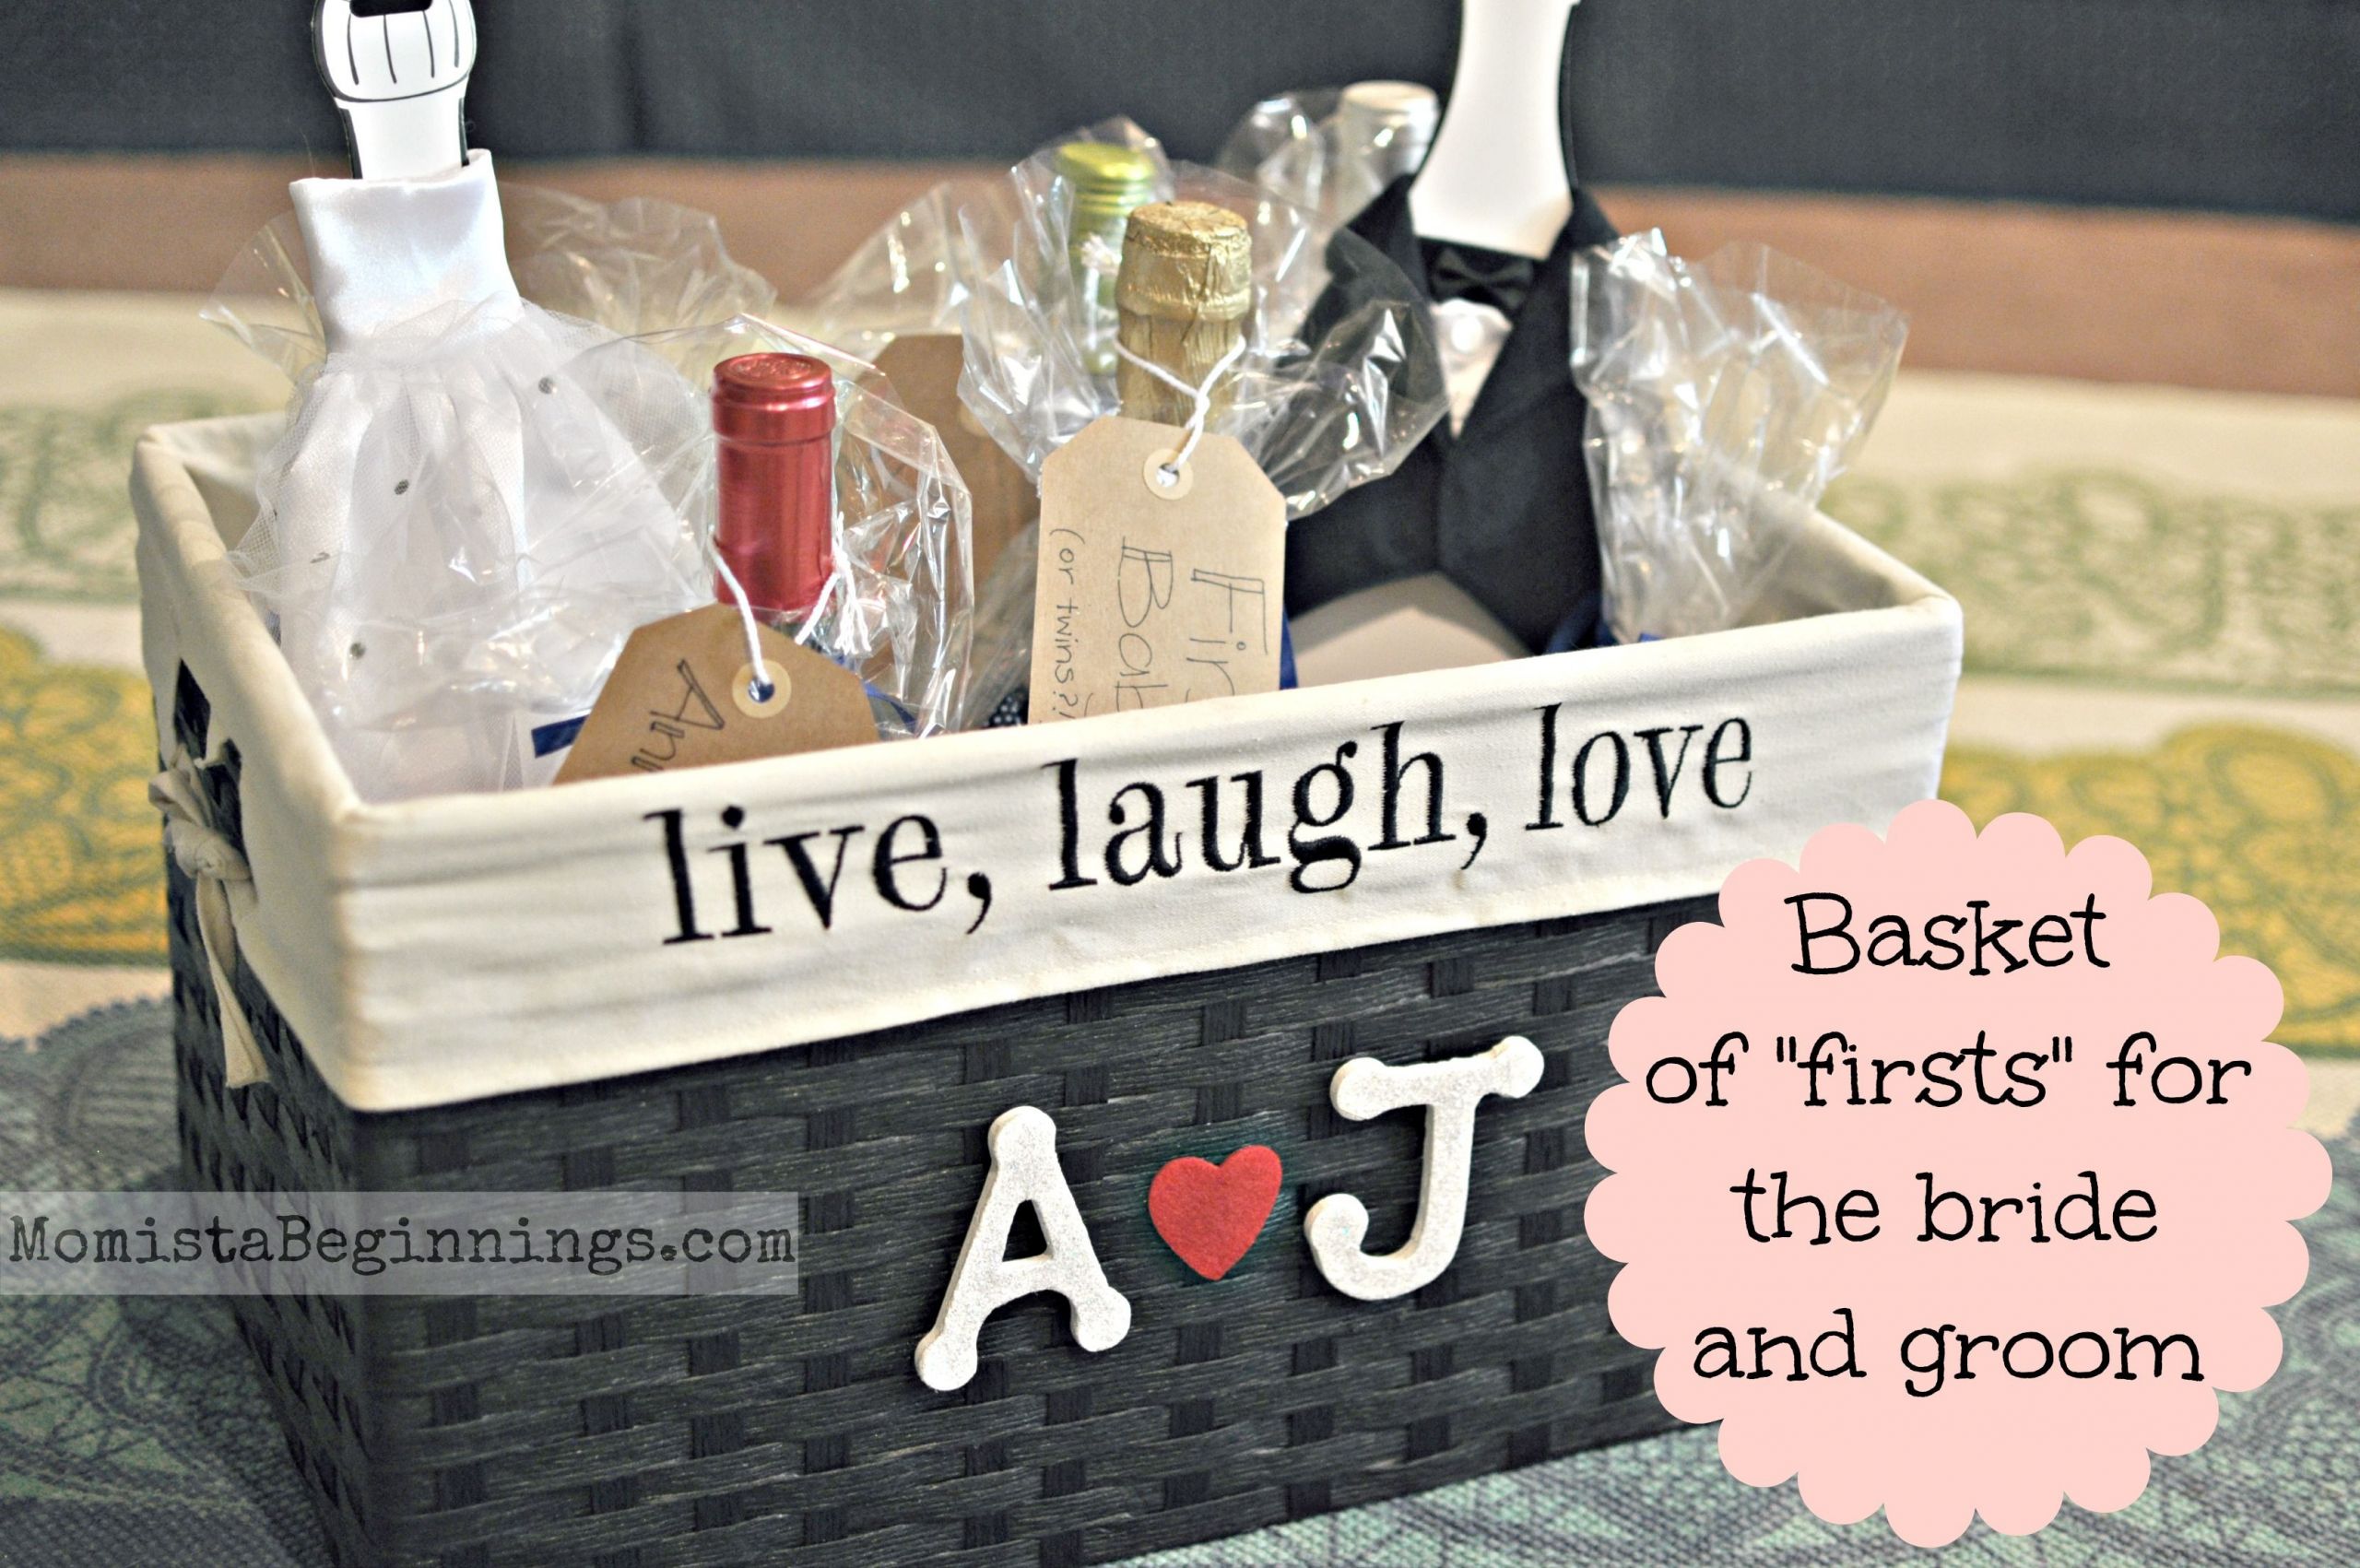 DIY Wedding Gift For Bride And Groom
 Basket of “Firsts” for the Bride and Groom DIY